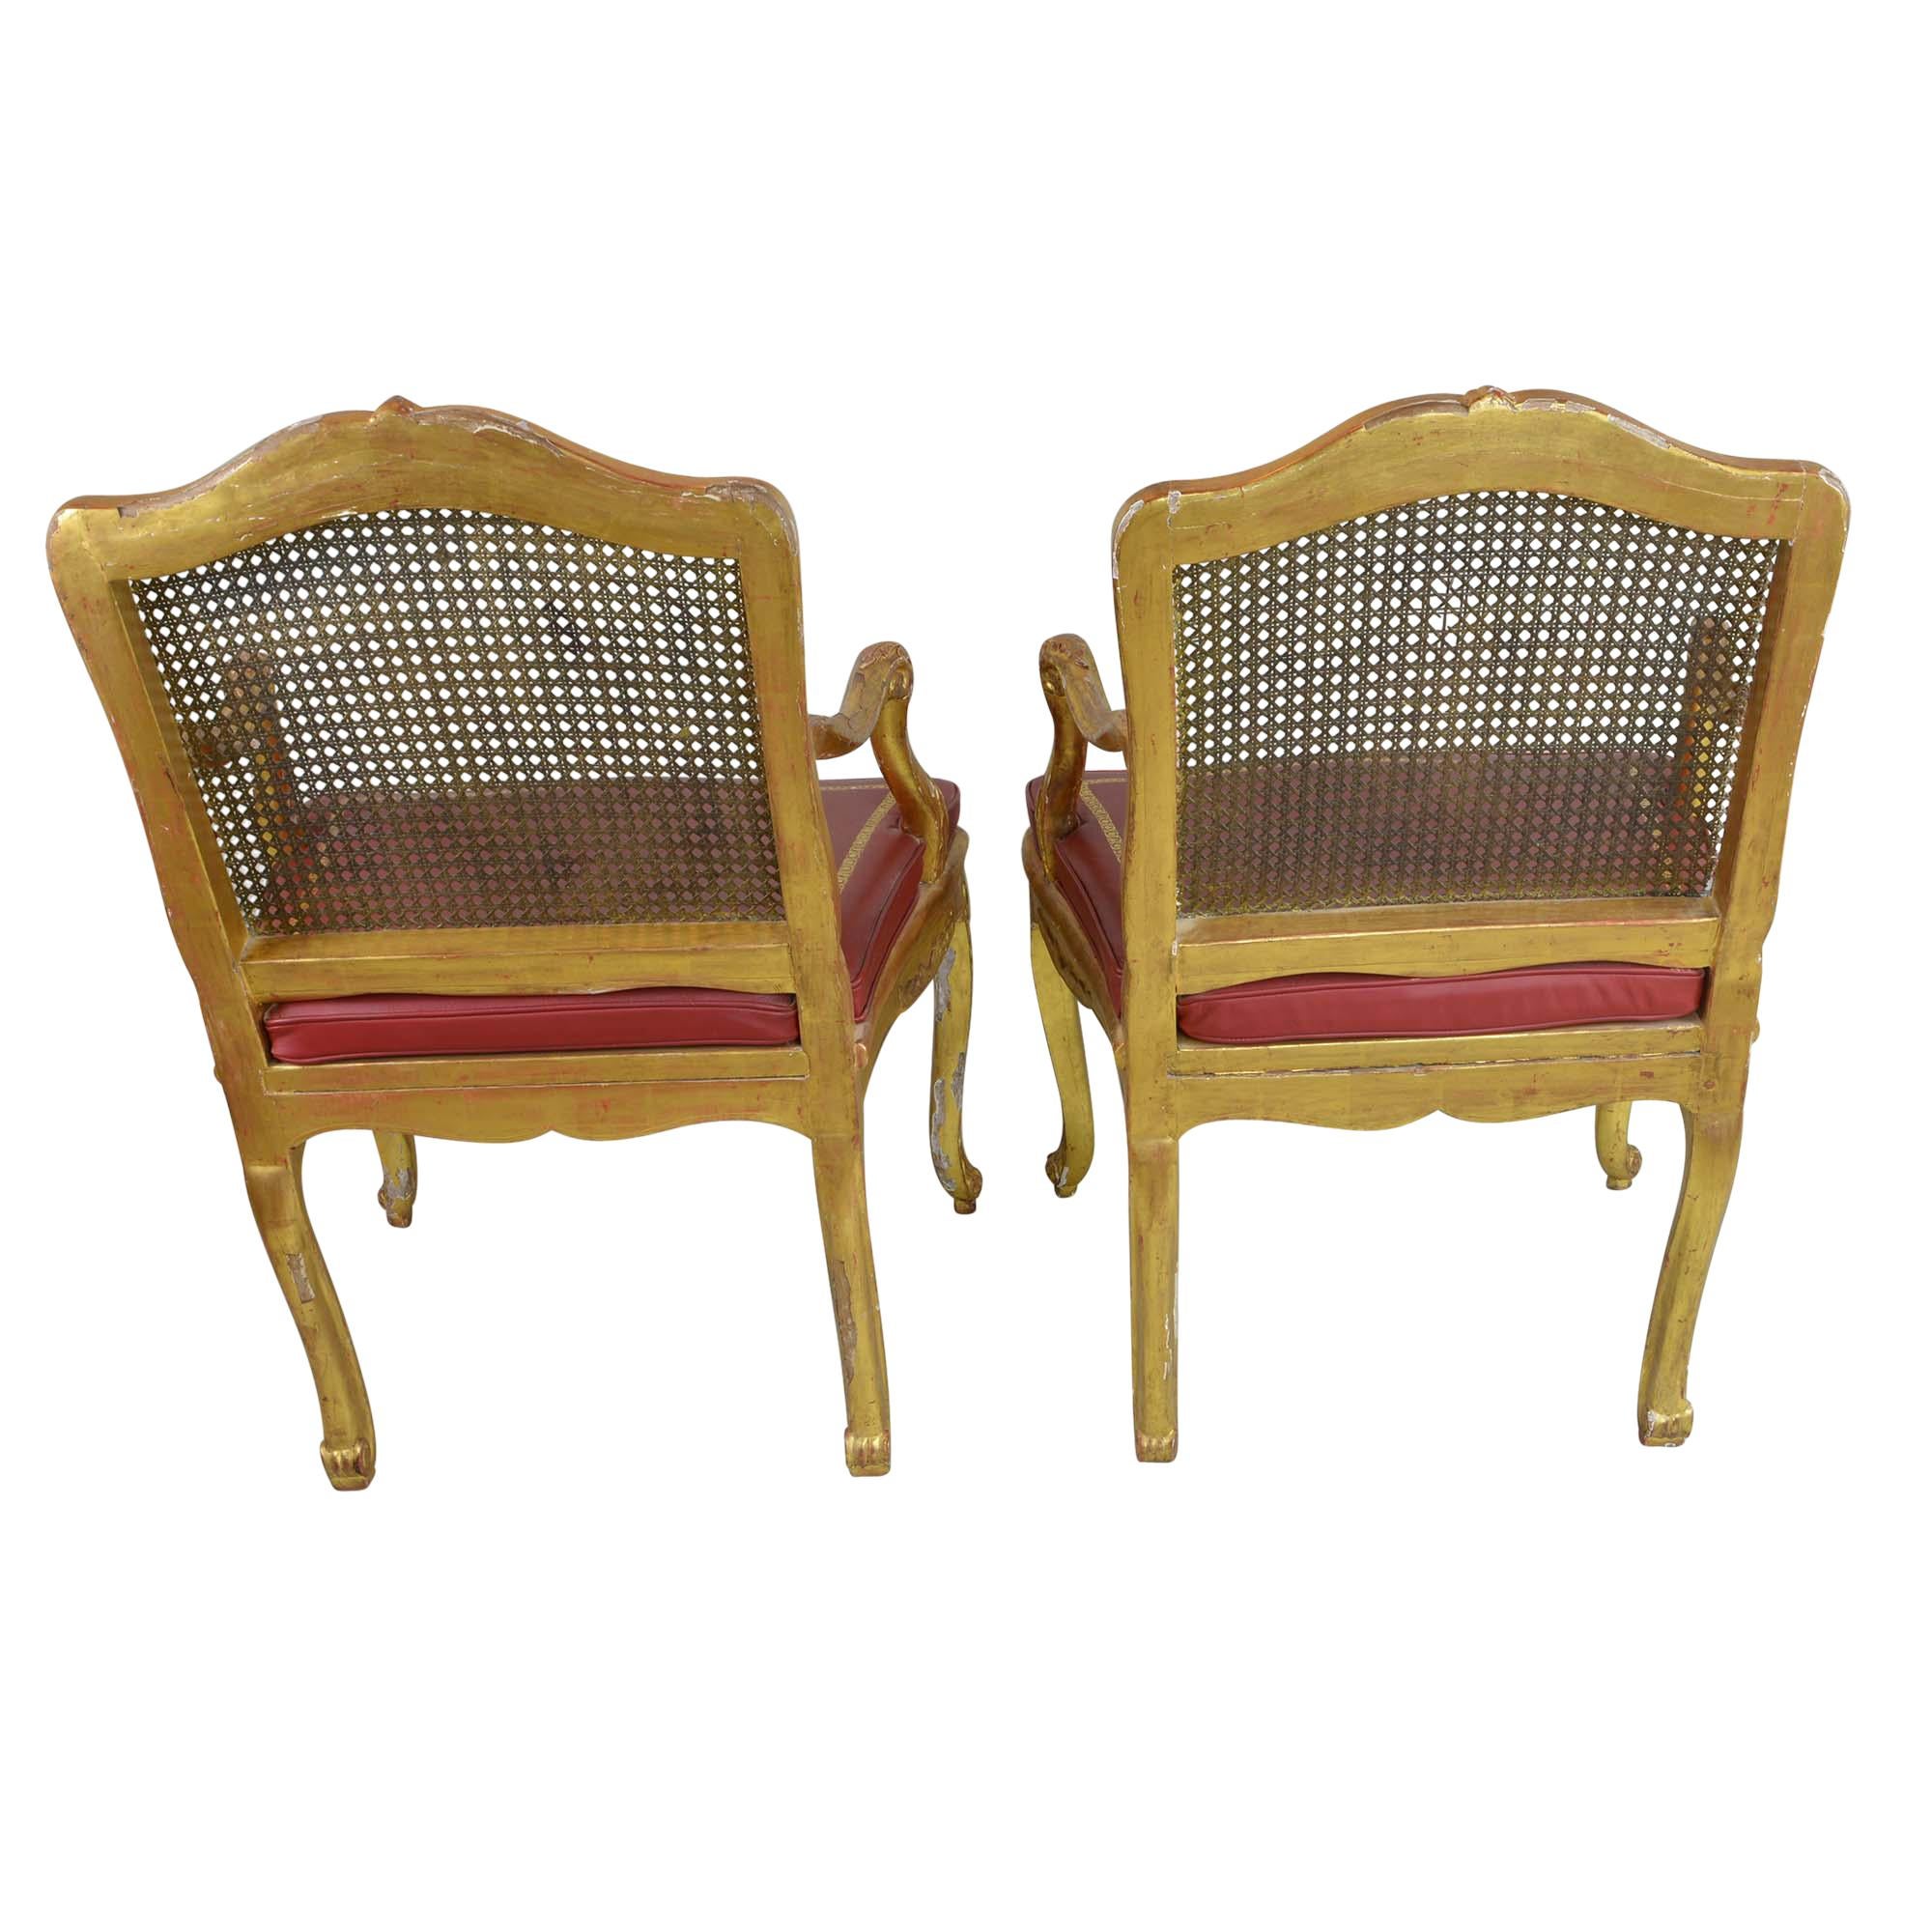 European Pair of Antique Gilded Wood Regency Chairs with Red Leather Cushions For Sale